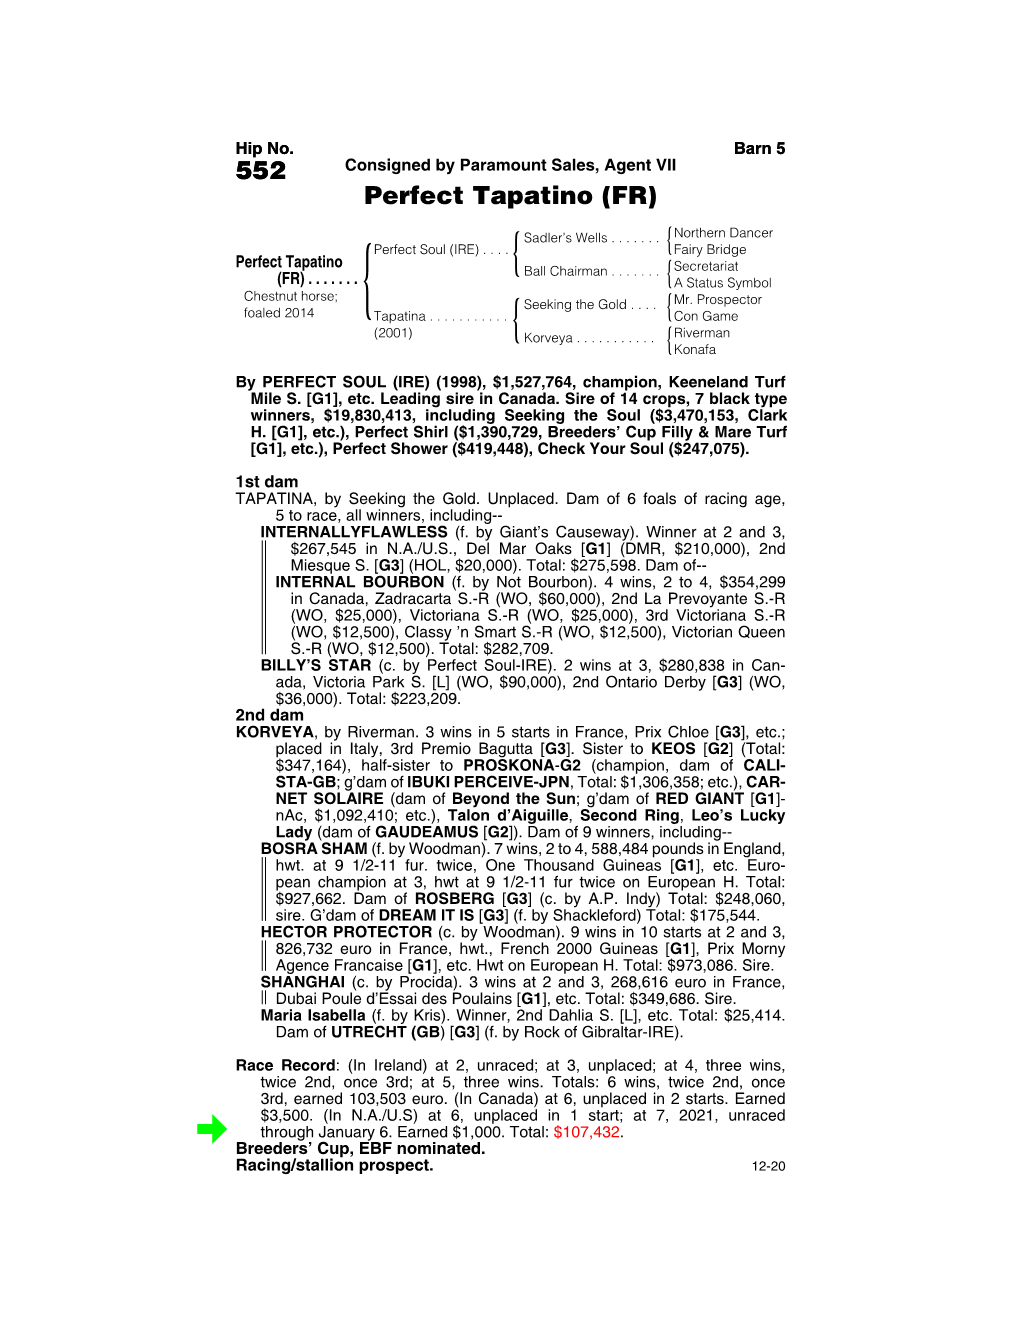 552 Consigned by Paramount Sales, Agent VII Perfect Tapatino (FR)